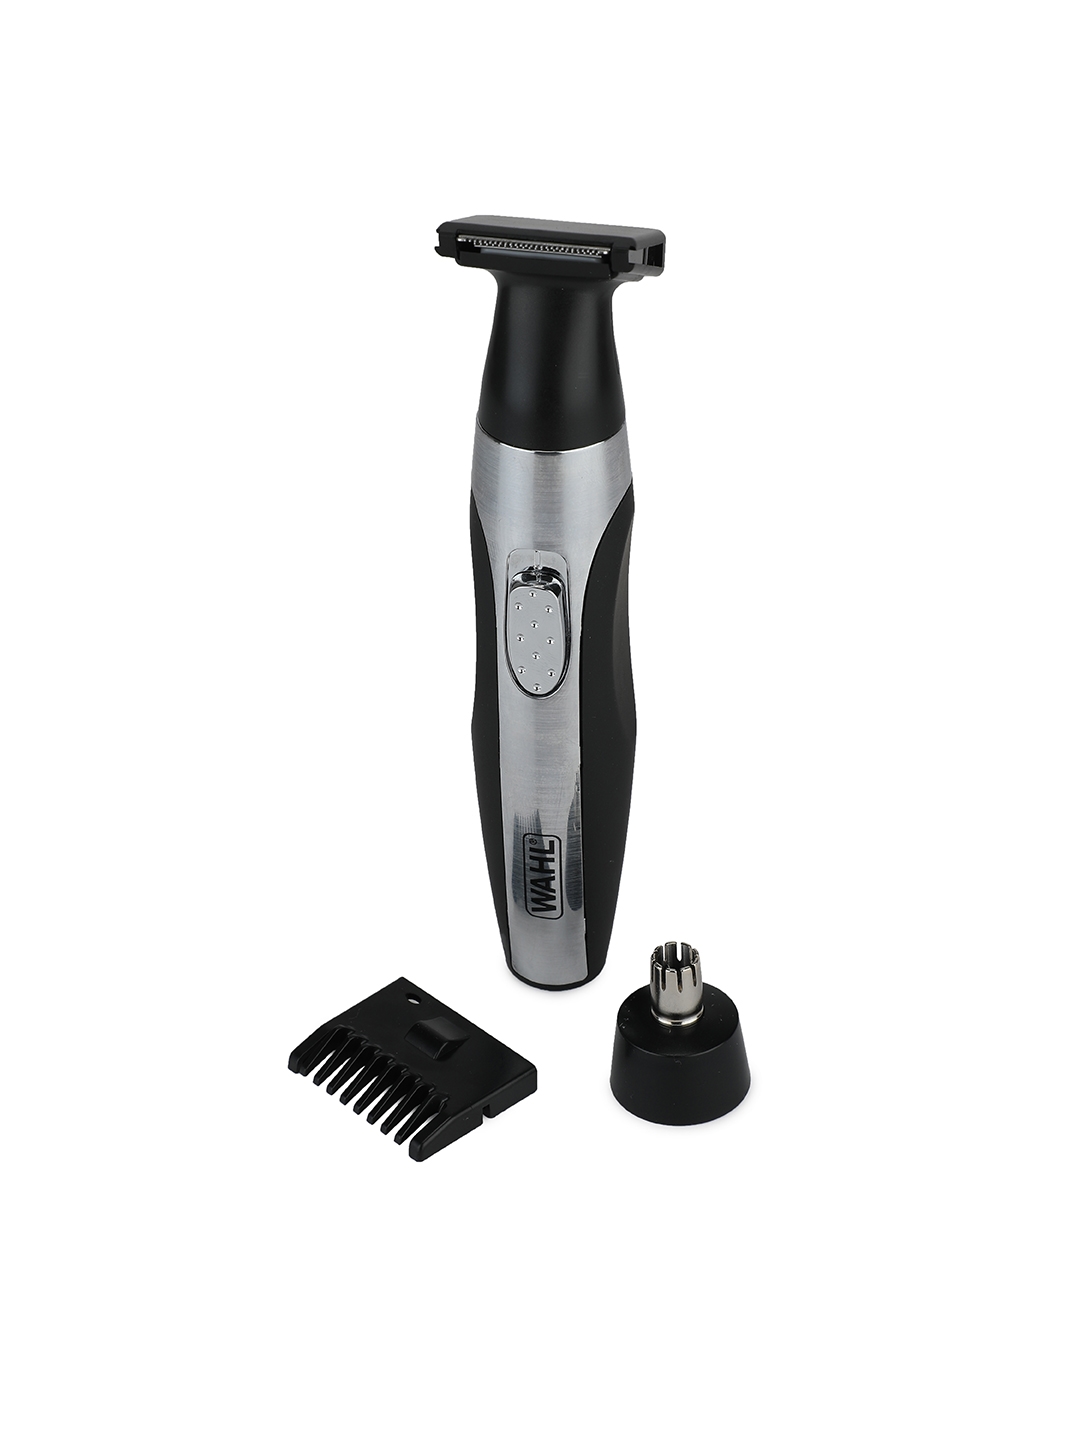 WAHL Quick Style Lithium Cordless Trimmer for Men 05604 024